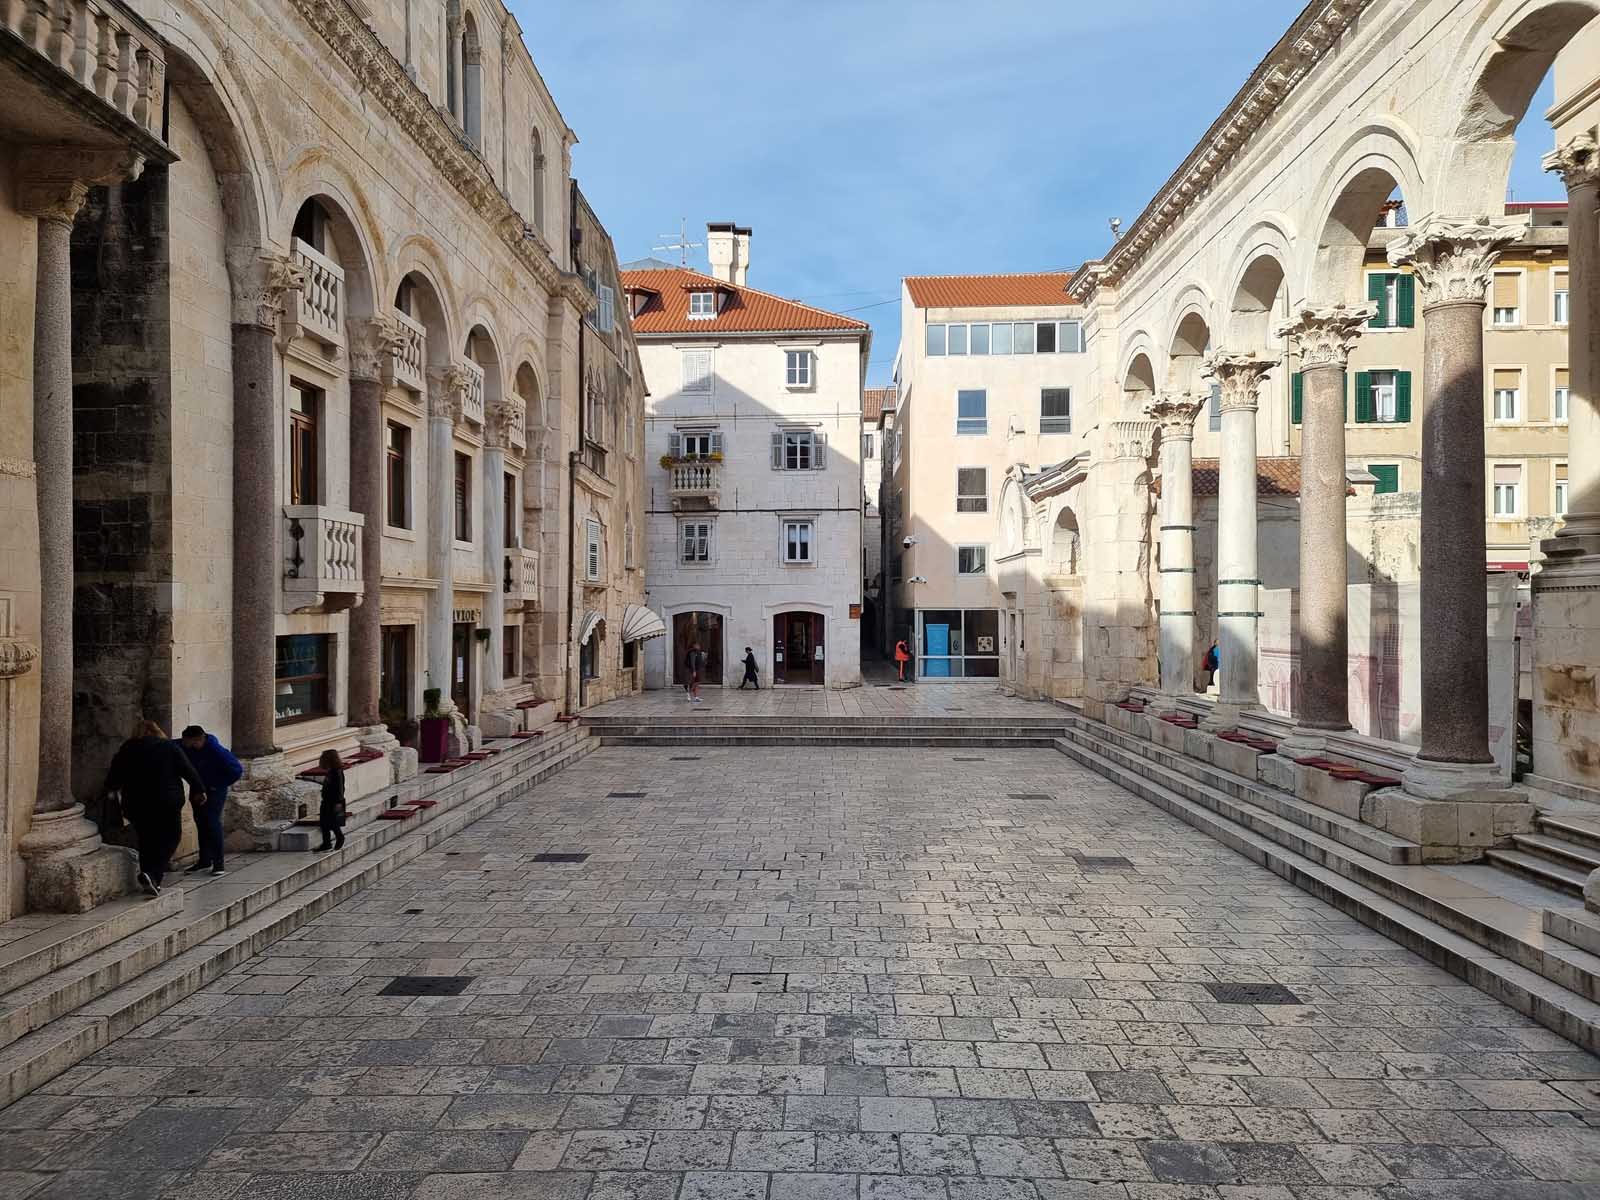 Frequently Asked Questions on Split, Croatia